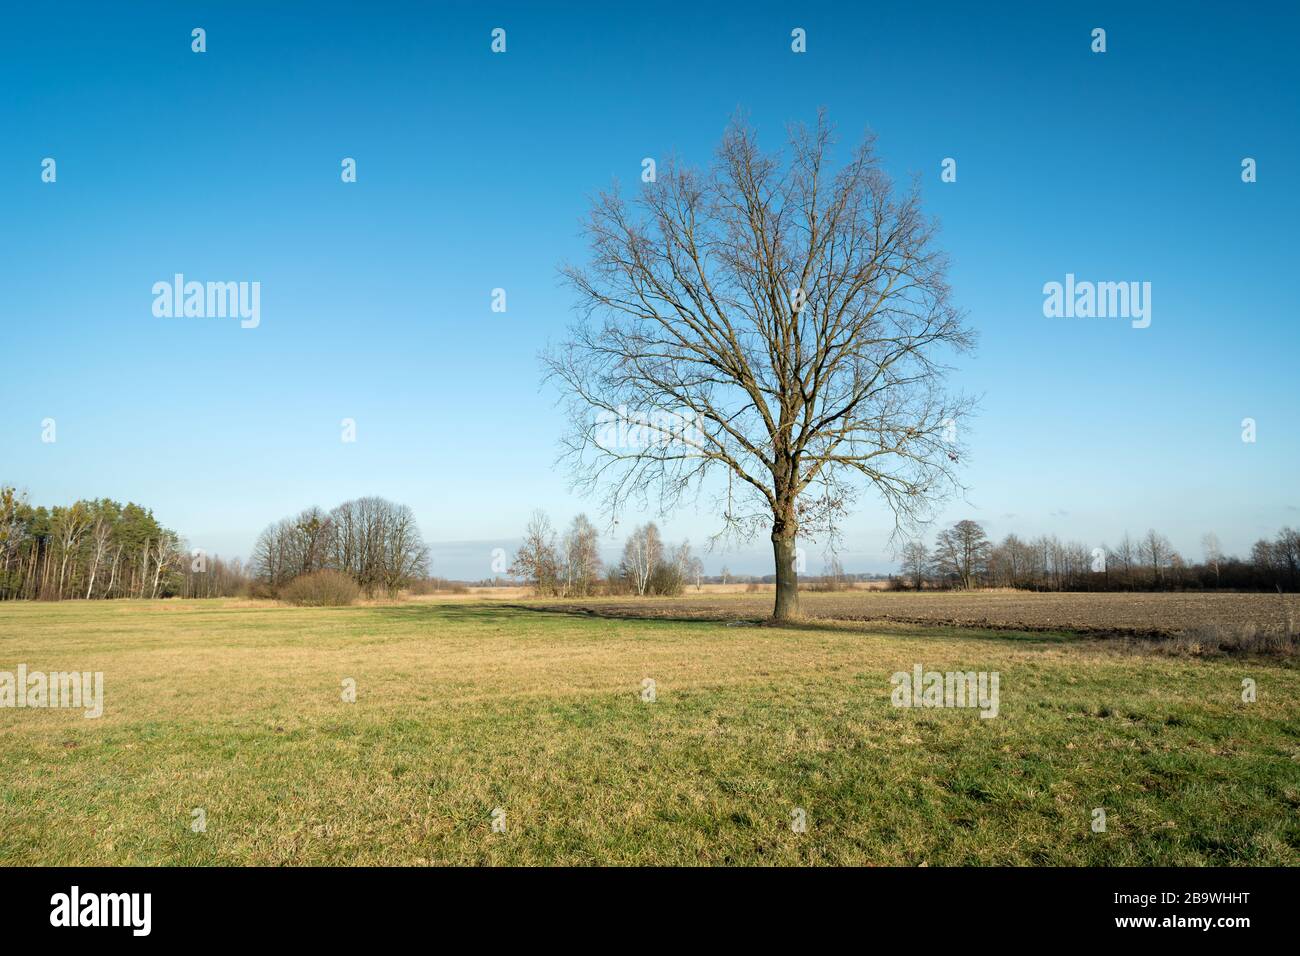 Large oak without leaves in the field, view on a sunny day Stock Photo